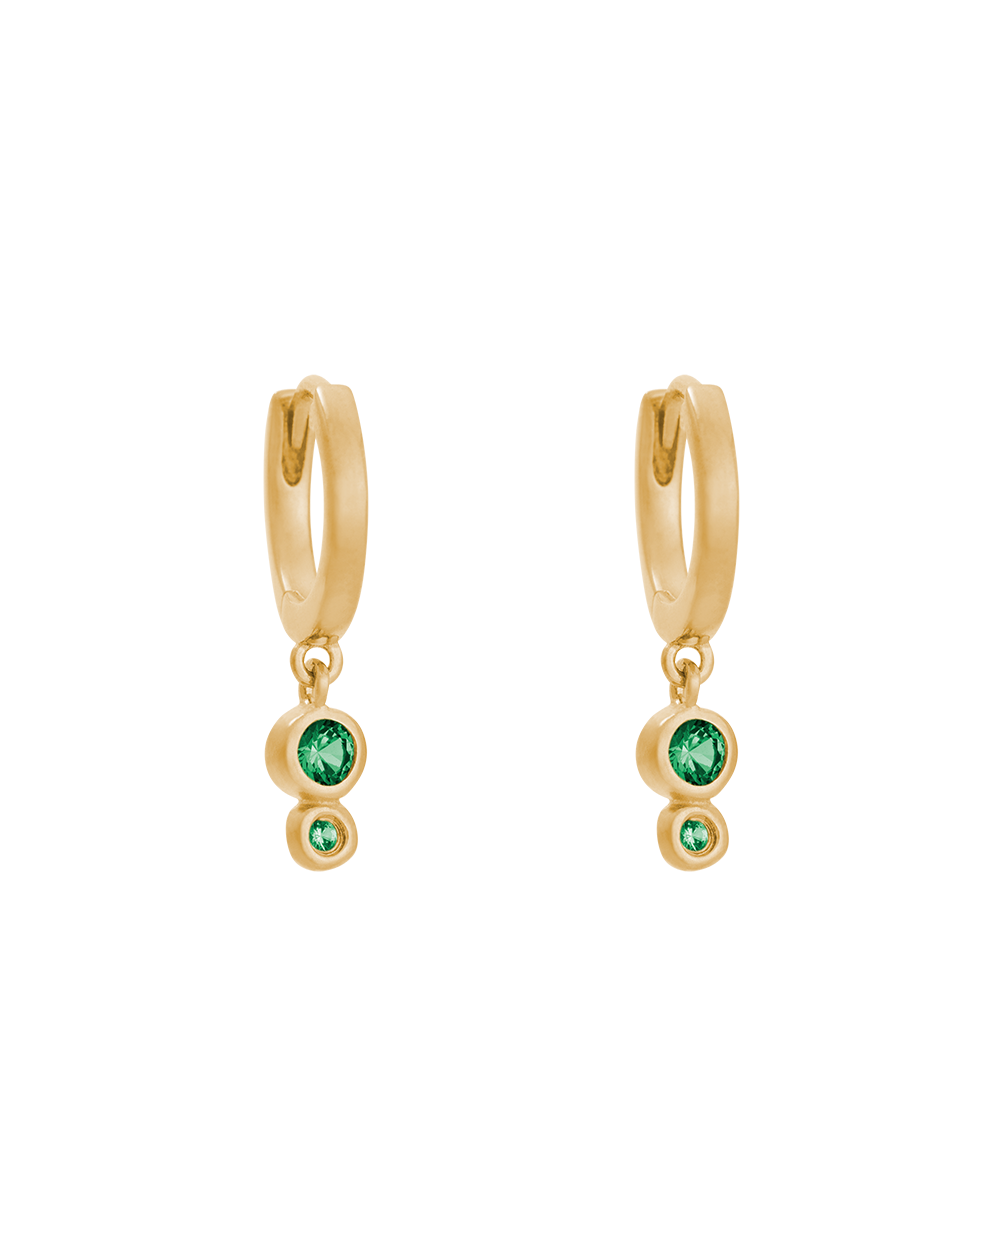 IL MARE DROPLET HOOPS (18K GOLD PLATED)